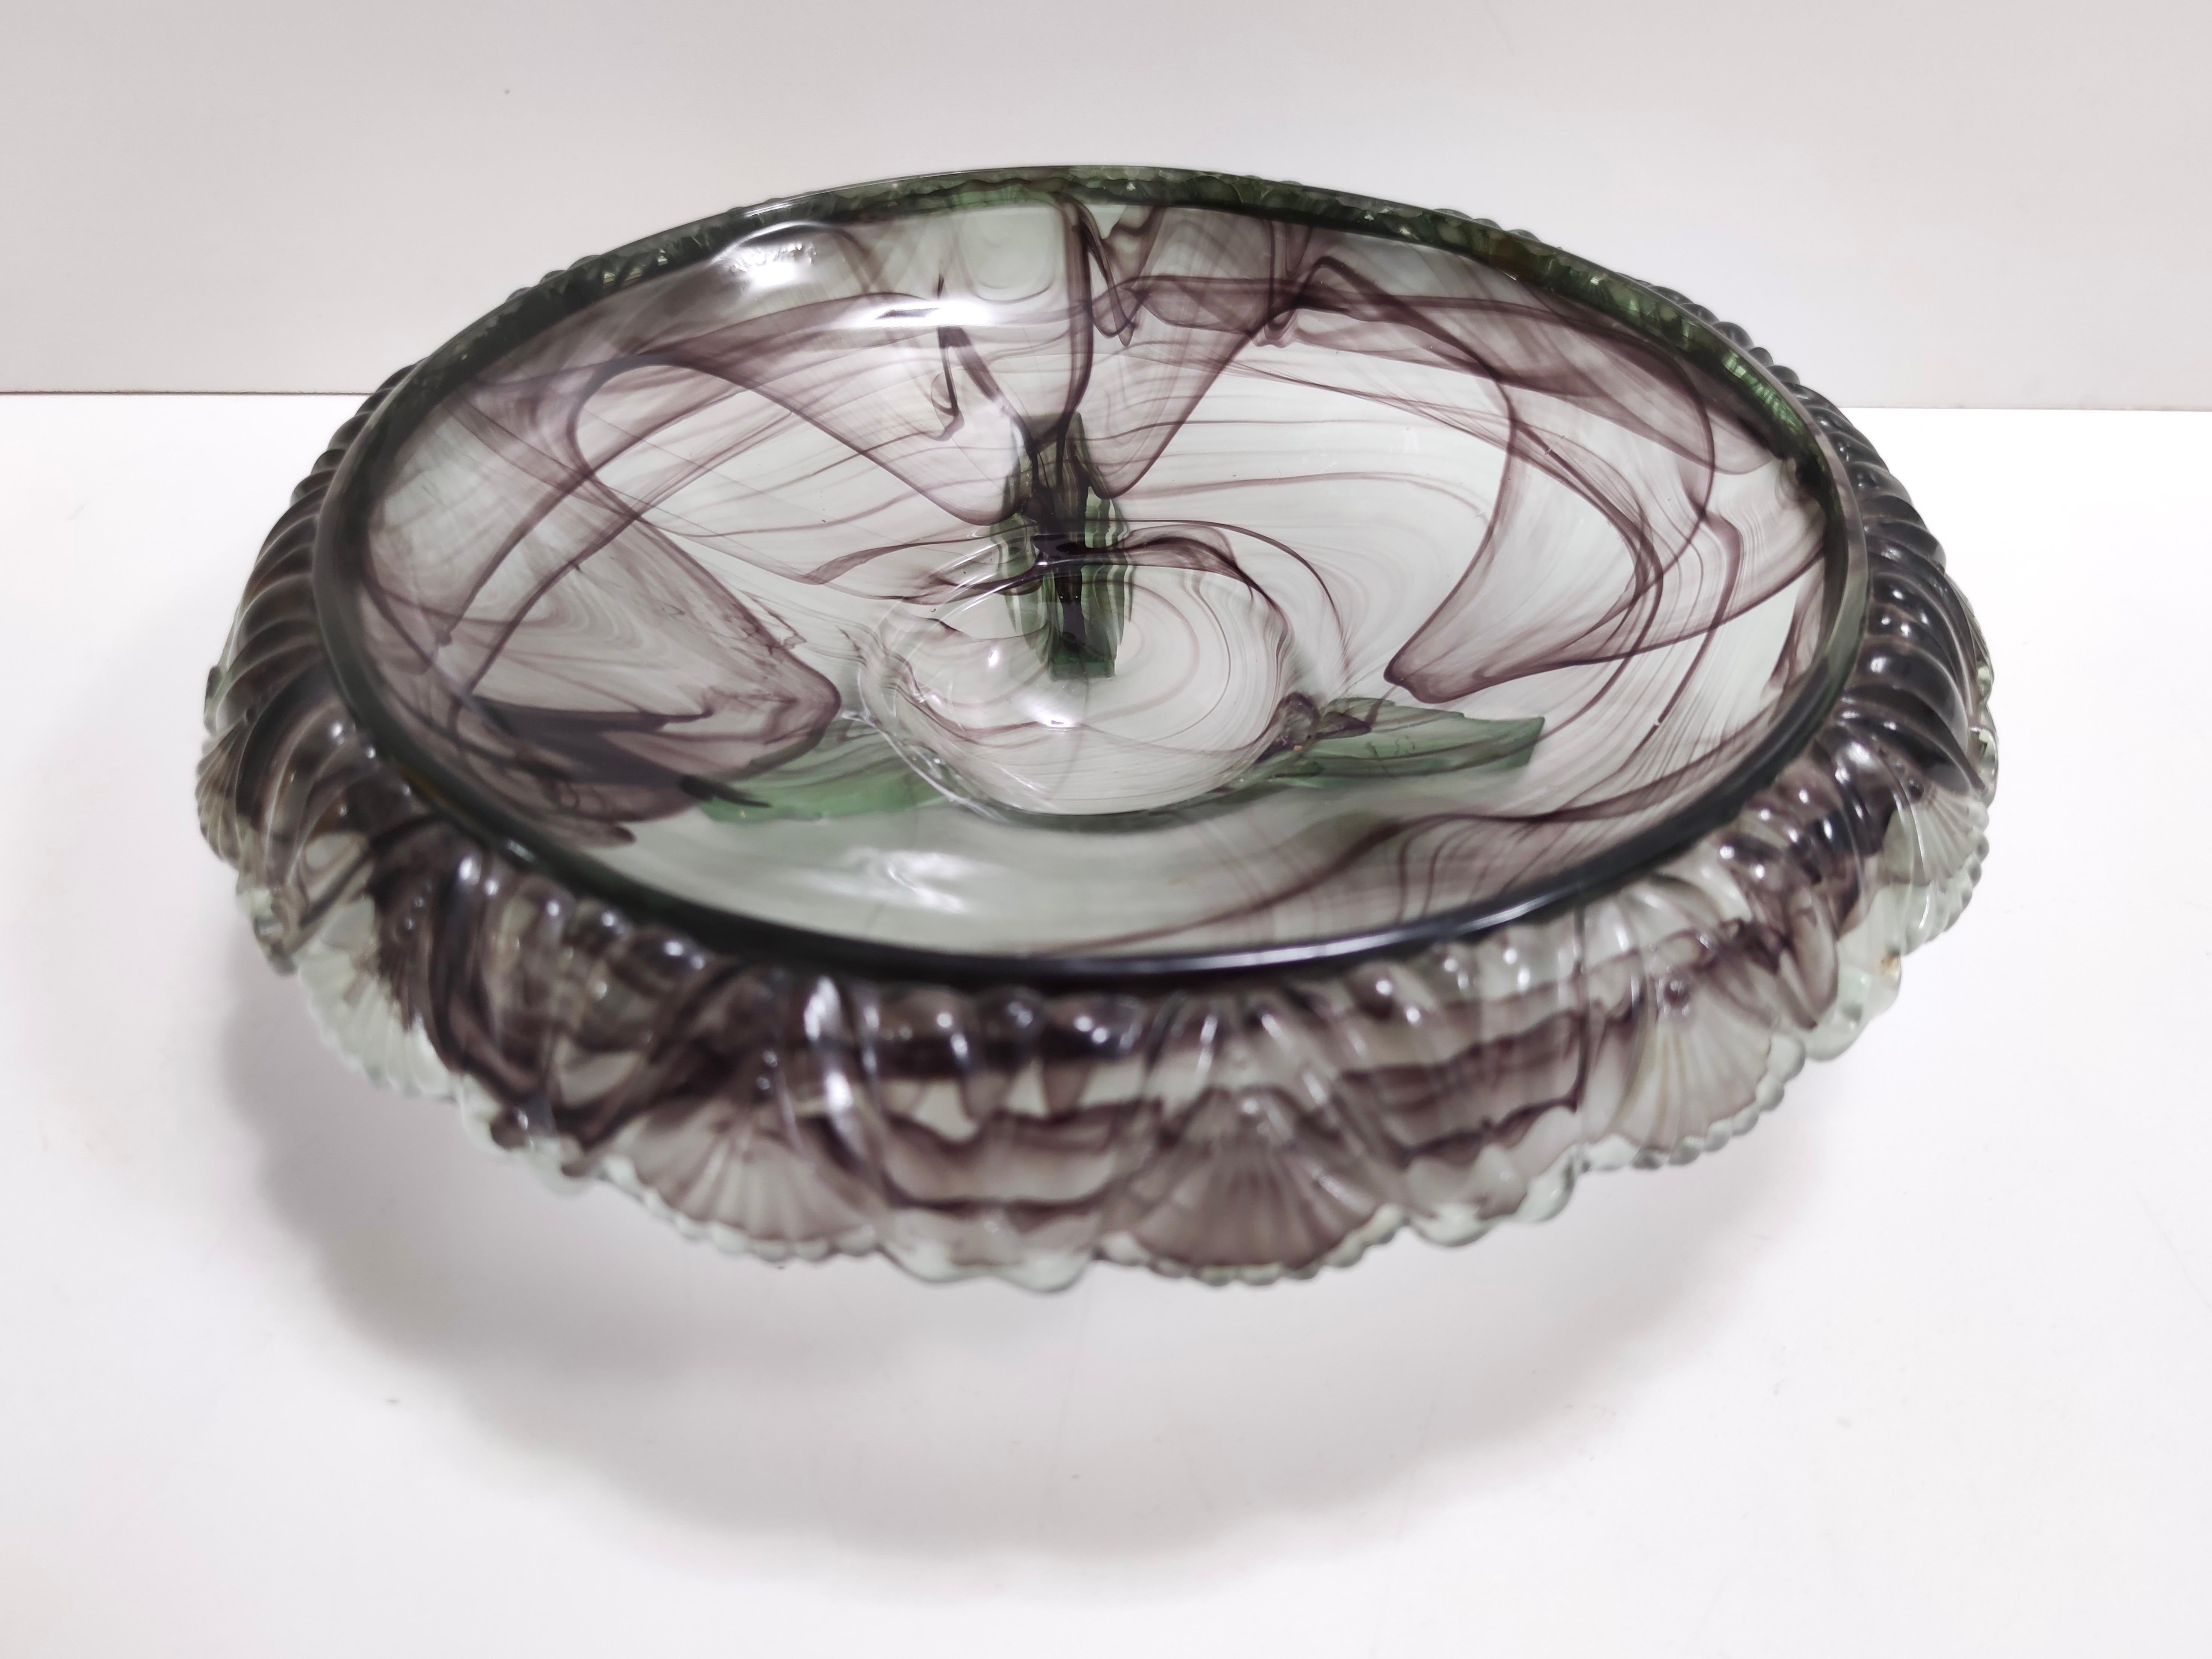 Vintage Topaz-Violet Cloud Glass Bowl or Centerpiece by Walther, Germany In Excellent Condition For Sale In Bresso, Lombardy